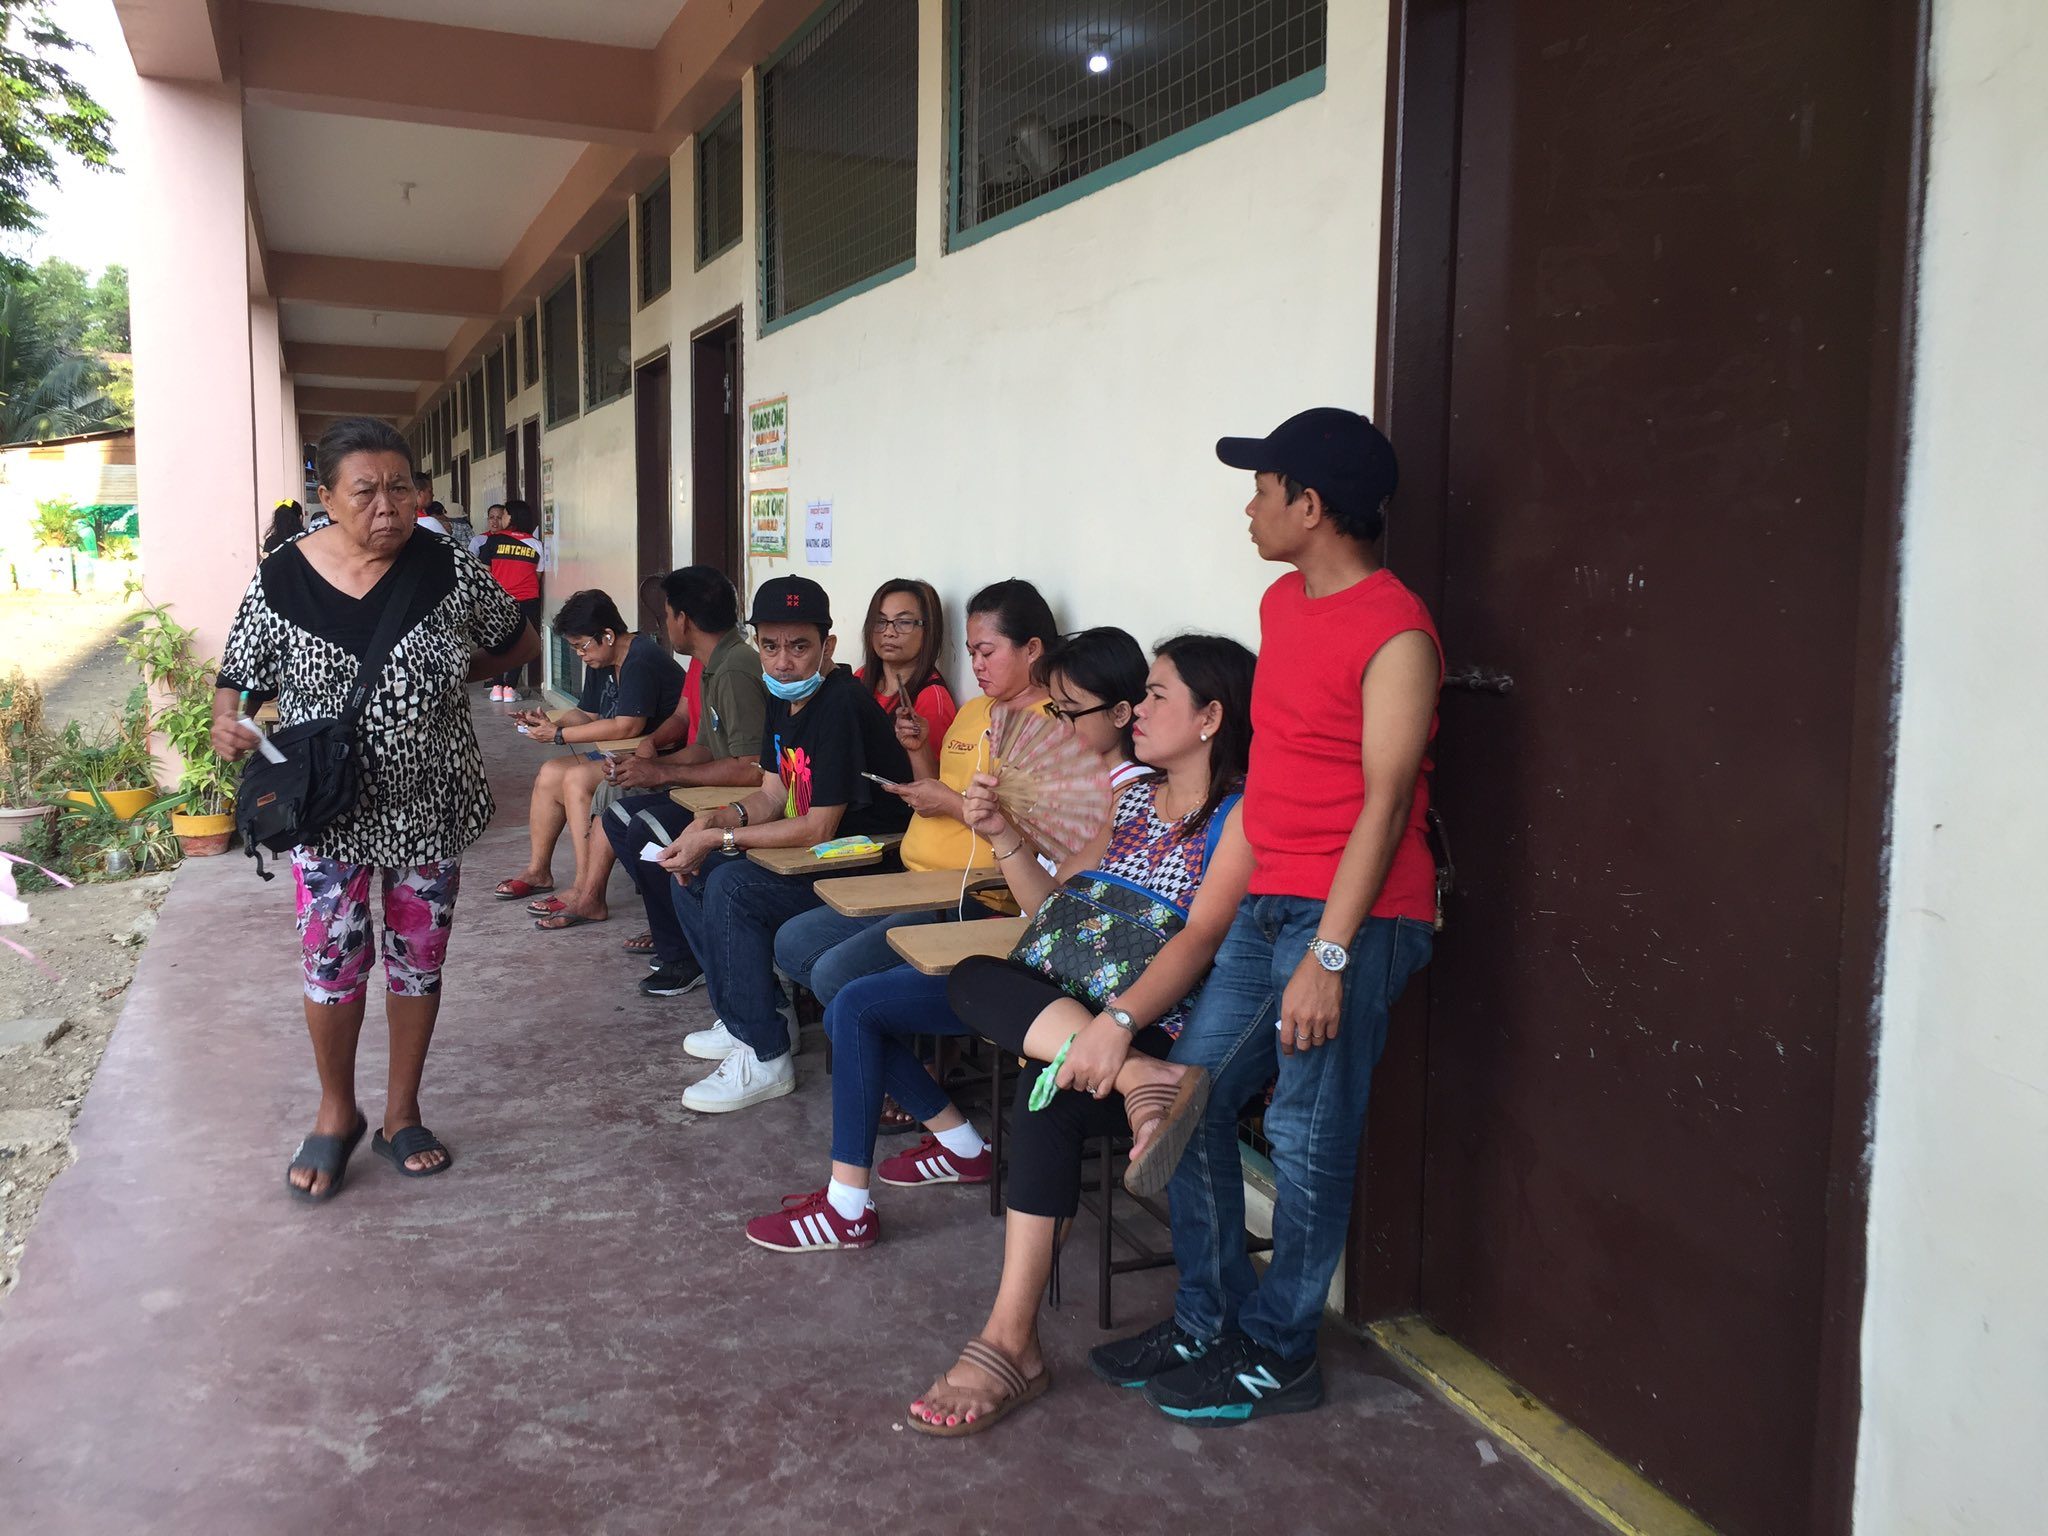 CEBU CITY. Voters at the Tisa II Elementary School in Cebu are given priority numbers and asked to sit at the designated waiting area. Photo by Micole Tizon/Rappler  